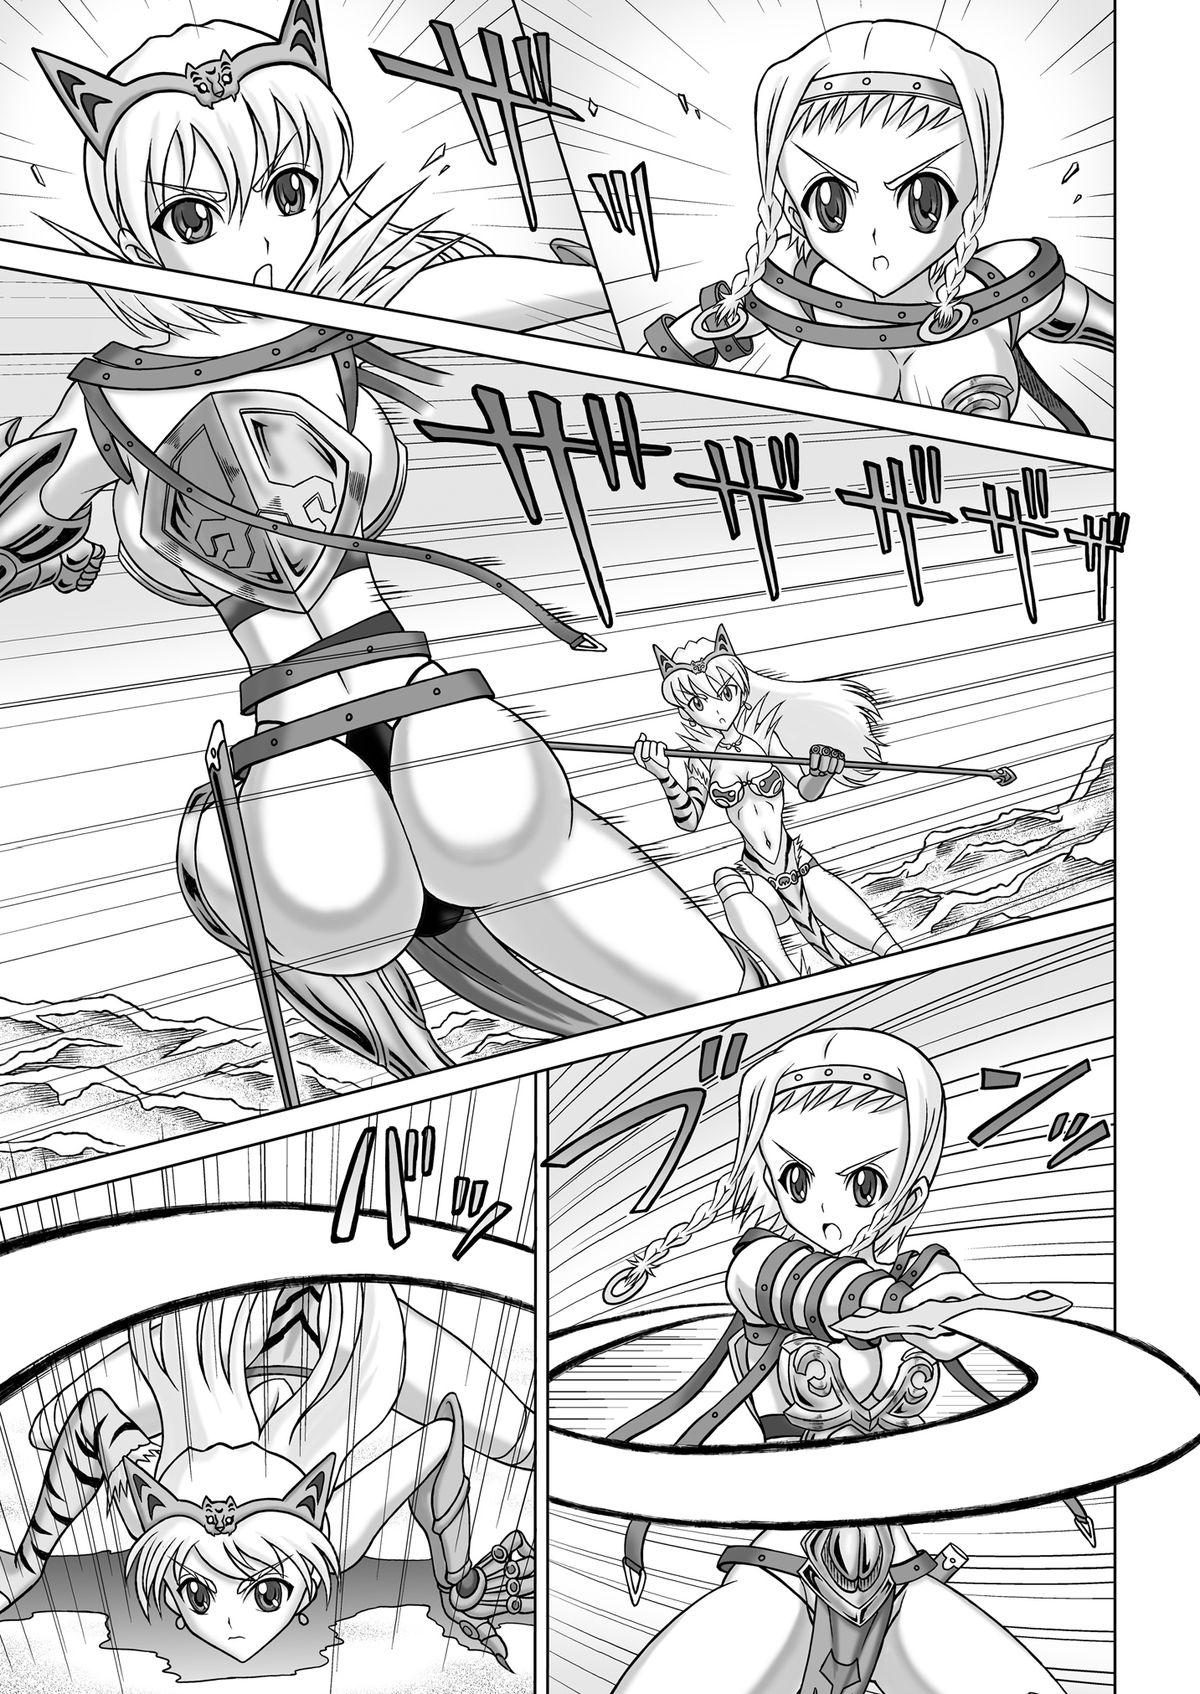 Beurette Queen's Sisters - Queens blade Free Blowjob - Page 9